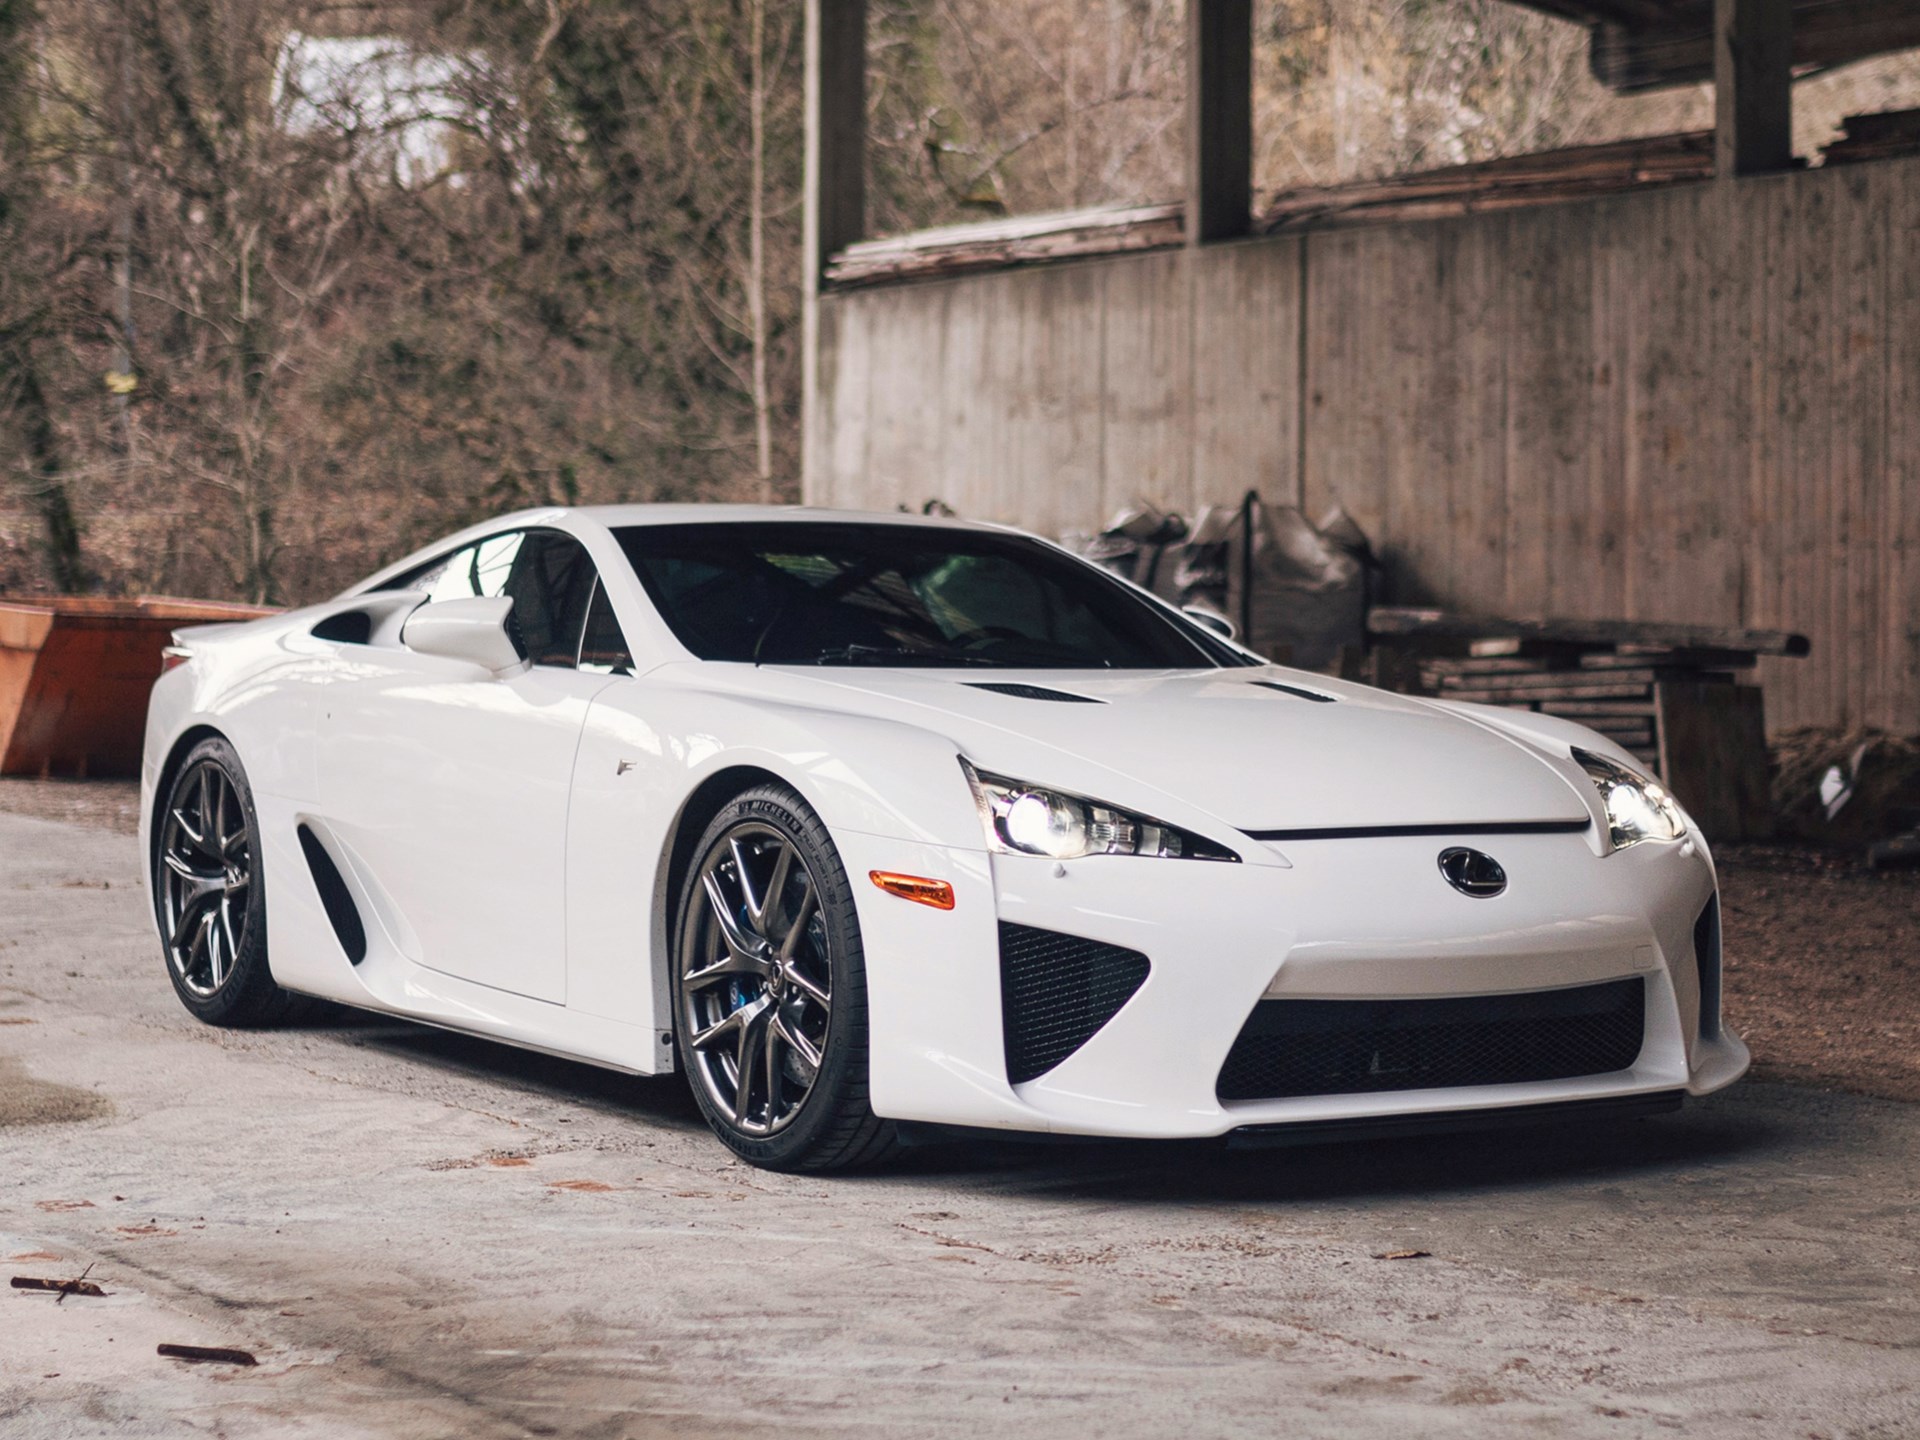 Lexus LFA Available For Immediate Sale At Sotheby's